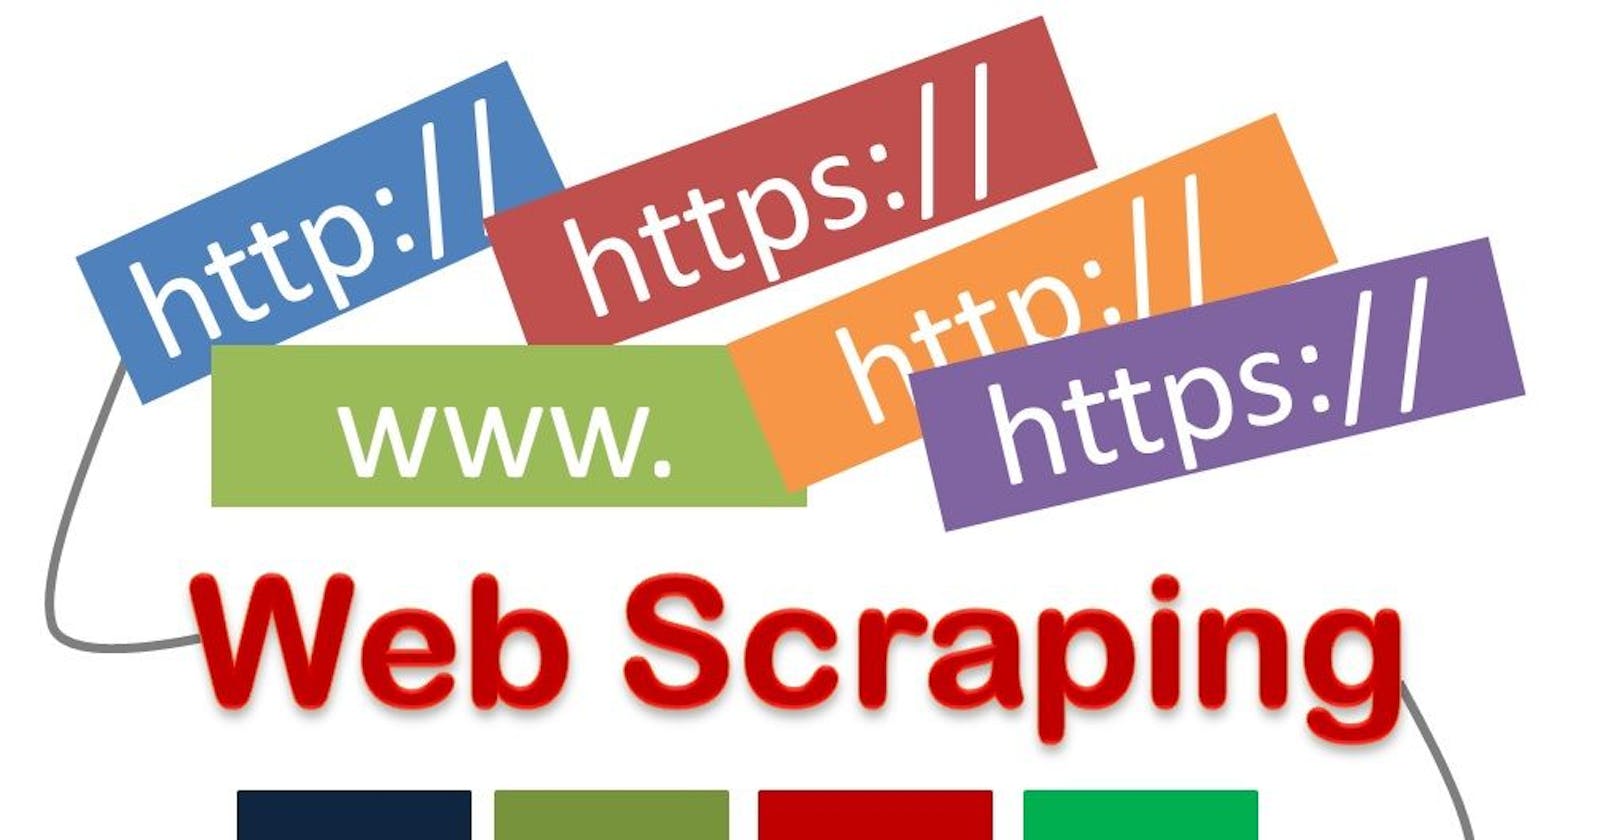 How to build a scraper to scrape any ecommerce website - Part 1